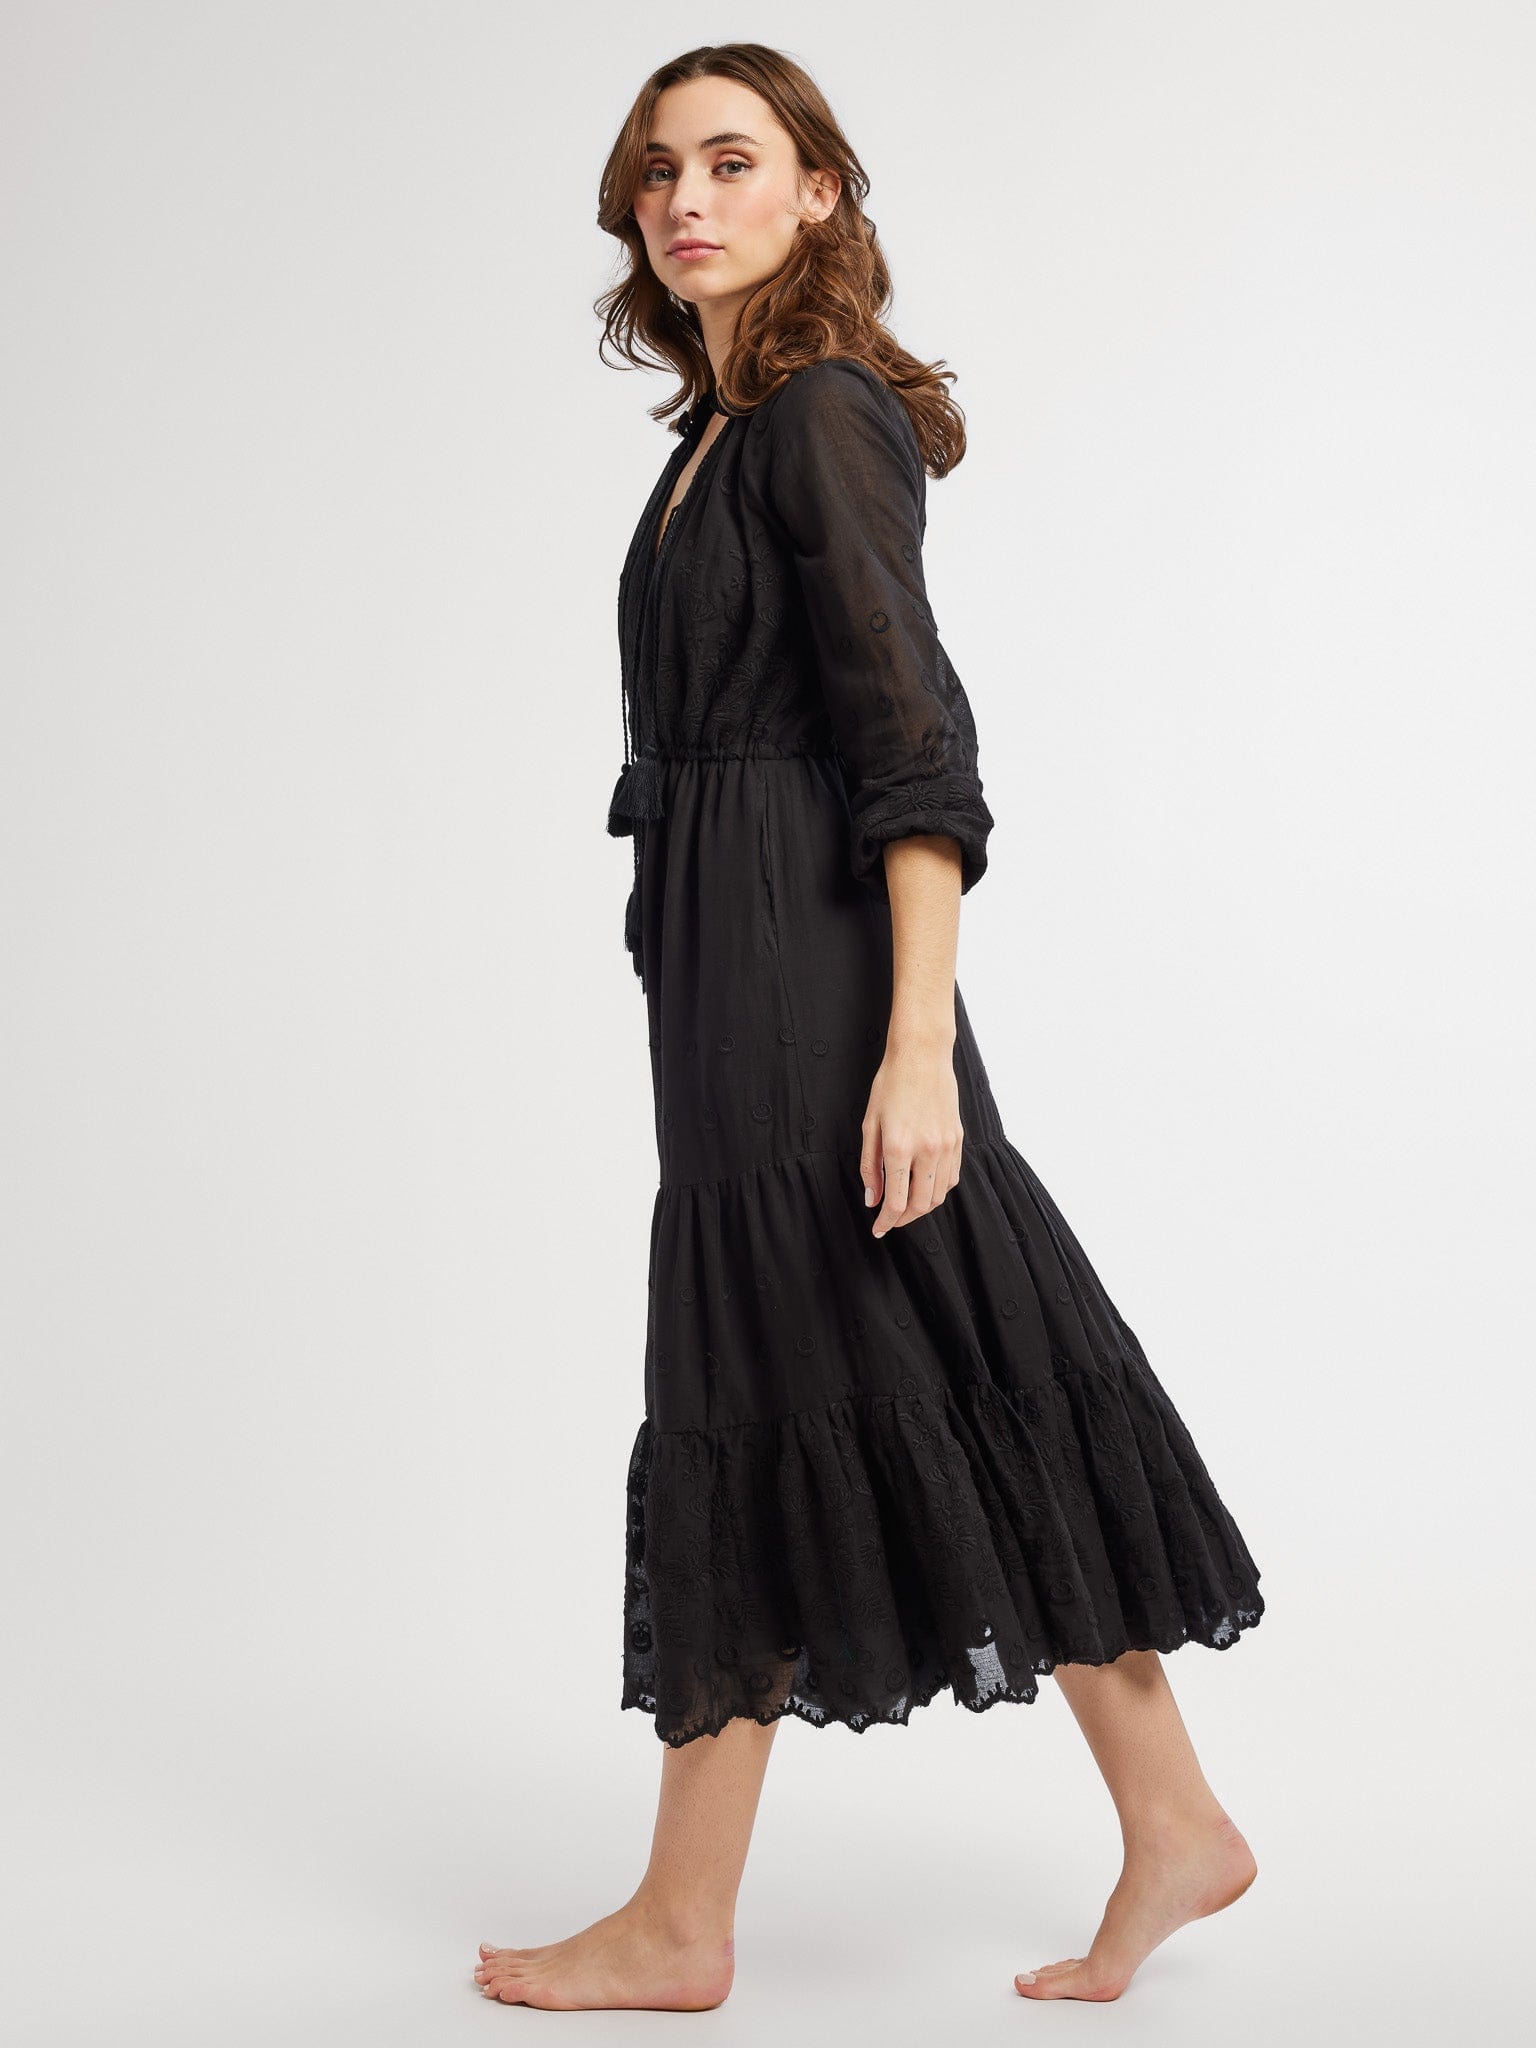 MILLE Clothing Astrid Dress in Black Petal Embroidery